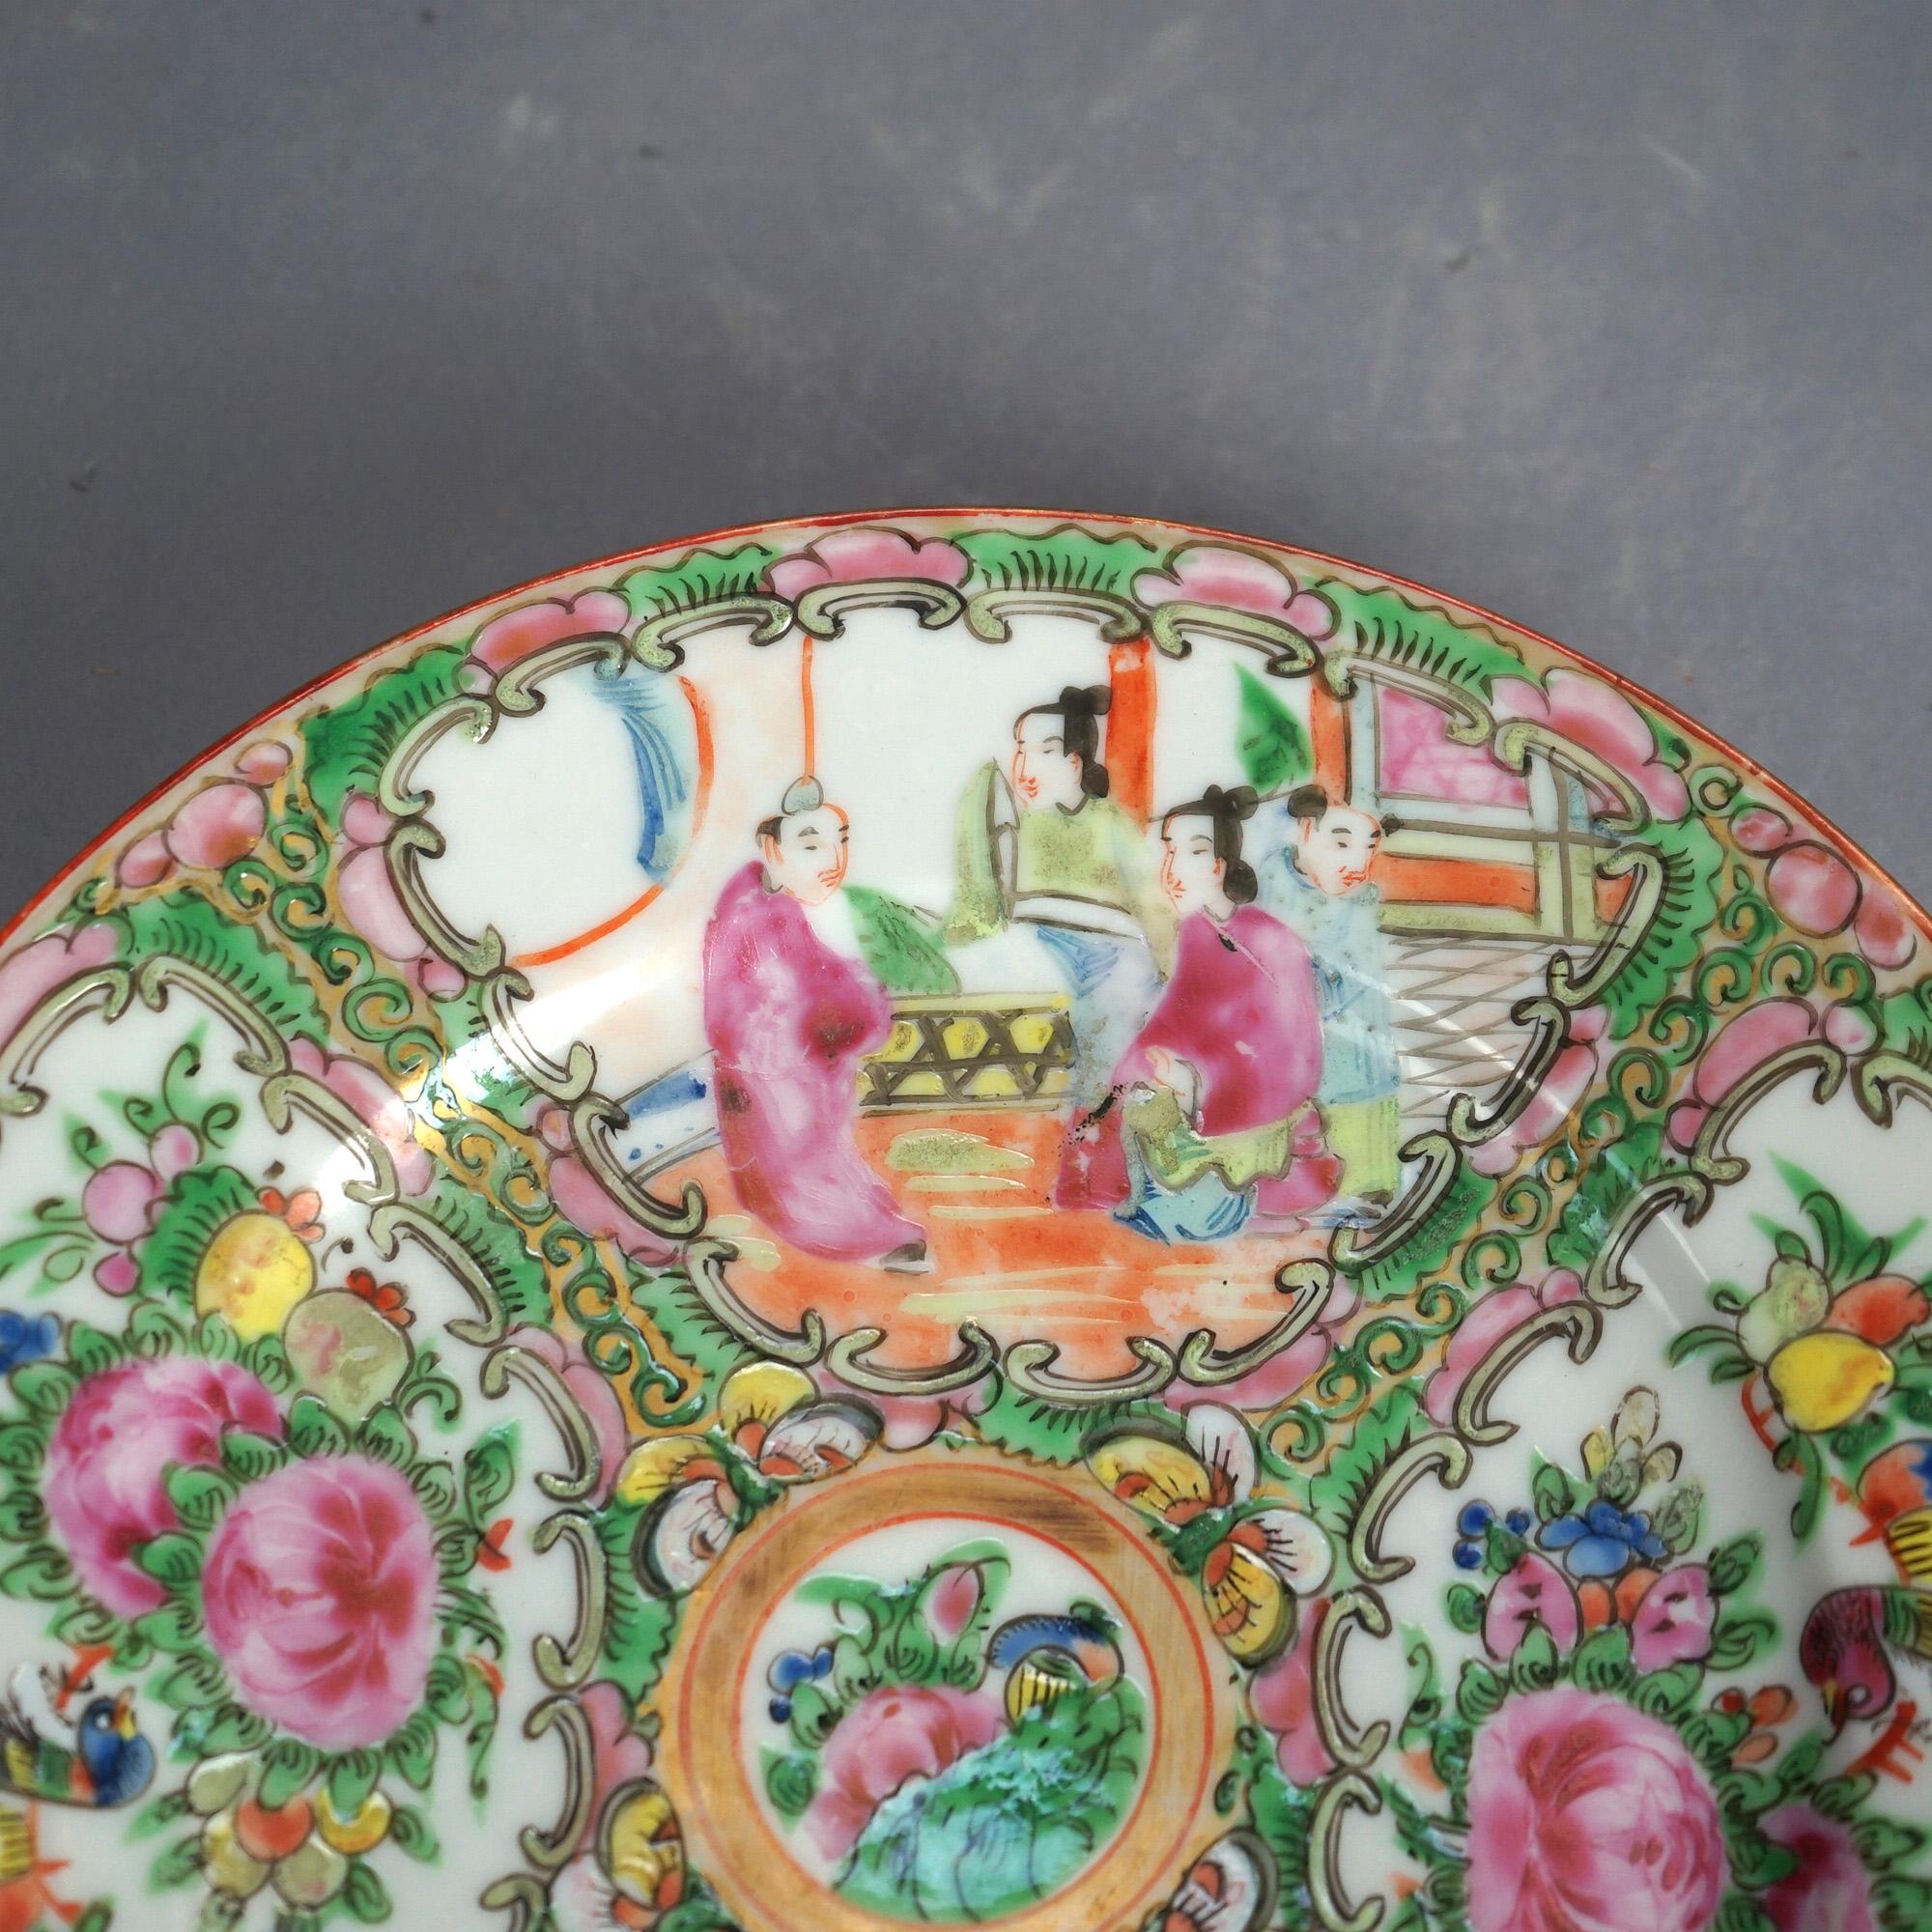 Antique Chinese Rose Medallion Porcelain Plates with Gardens & Figures C1900 For Sale 2